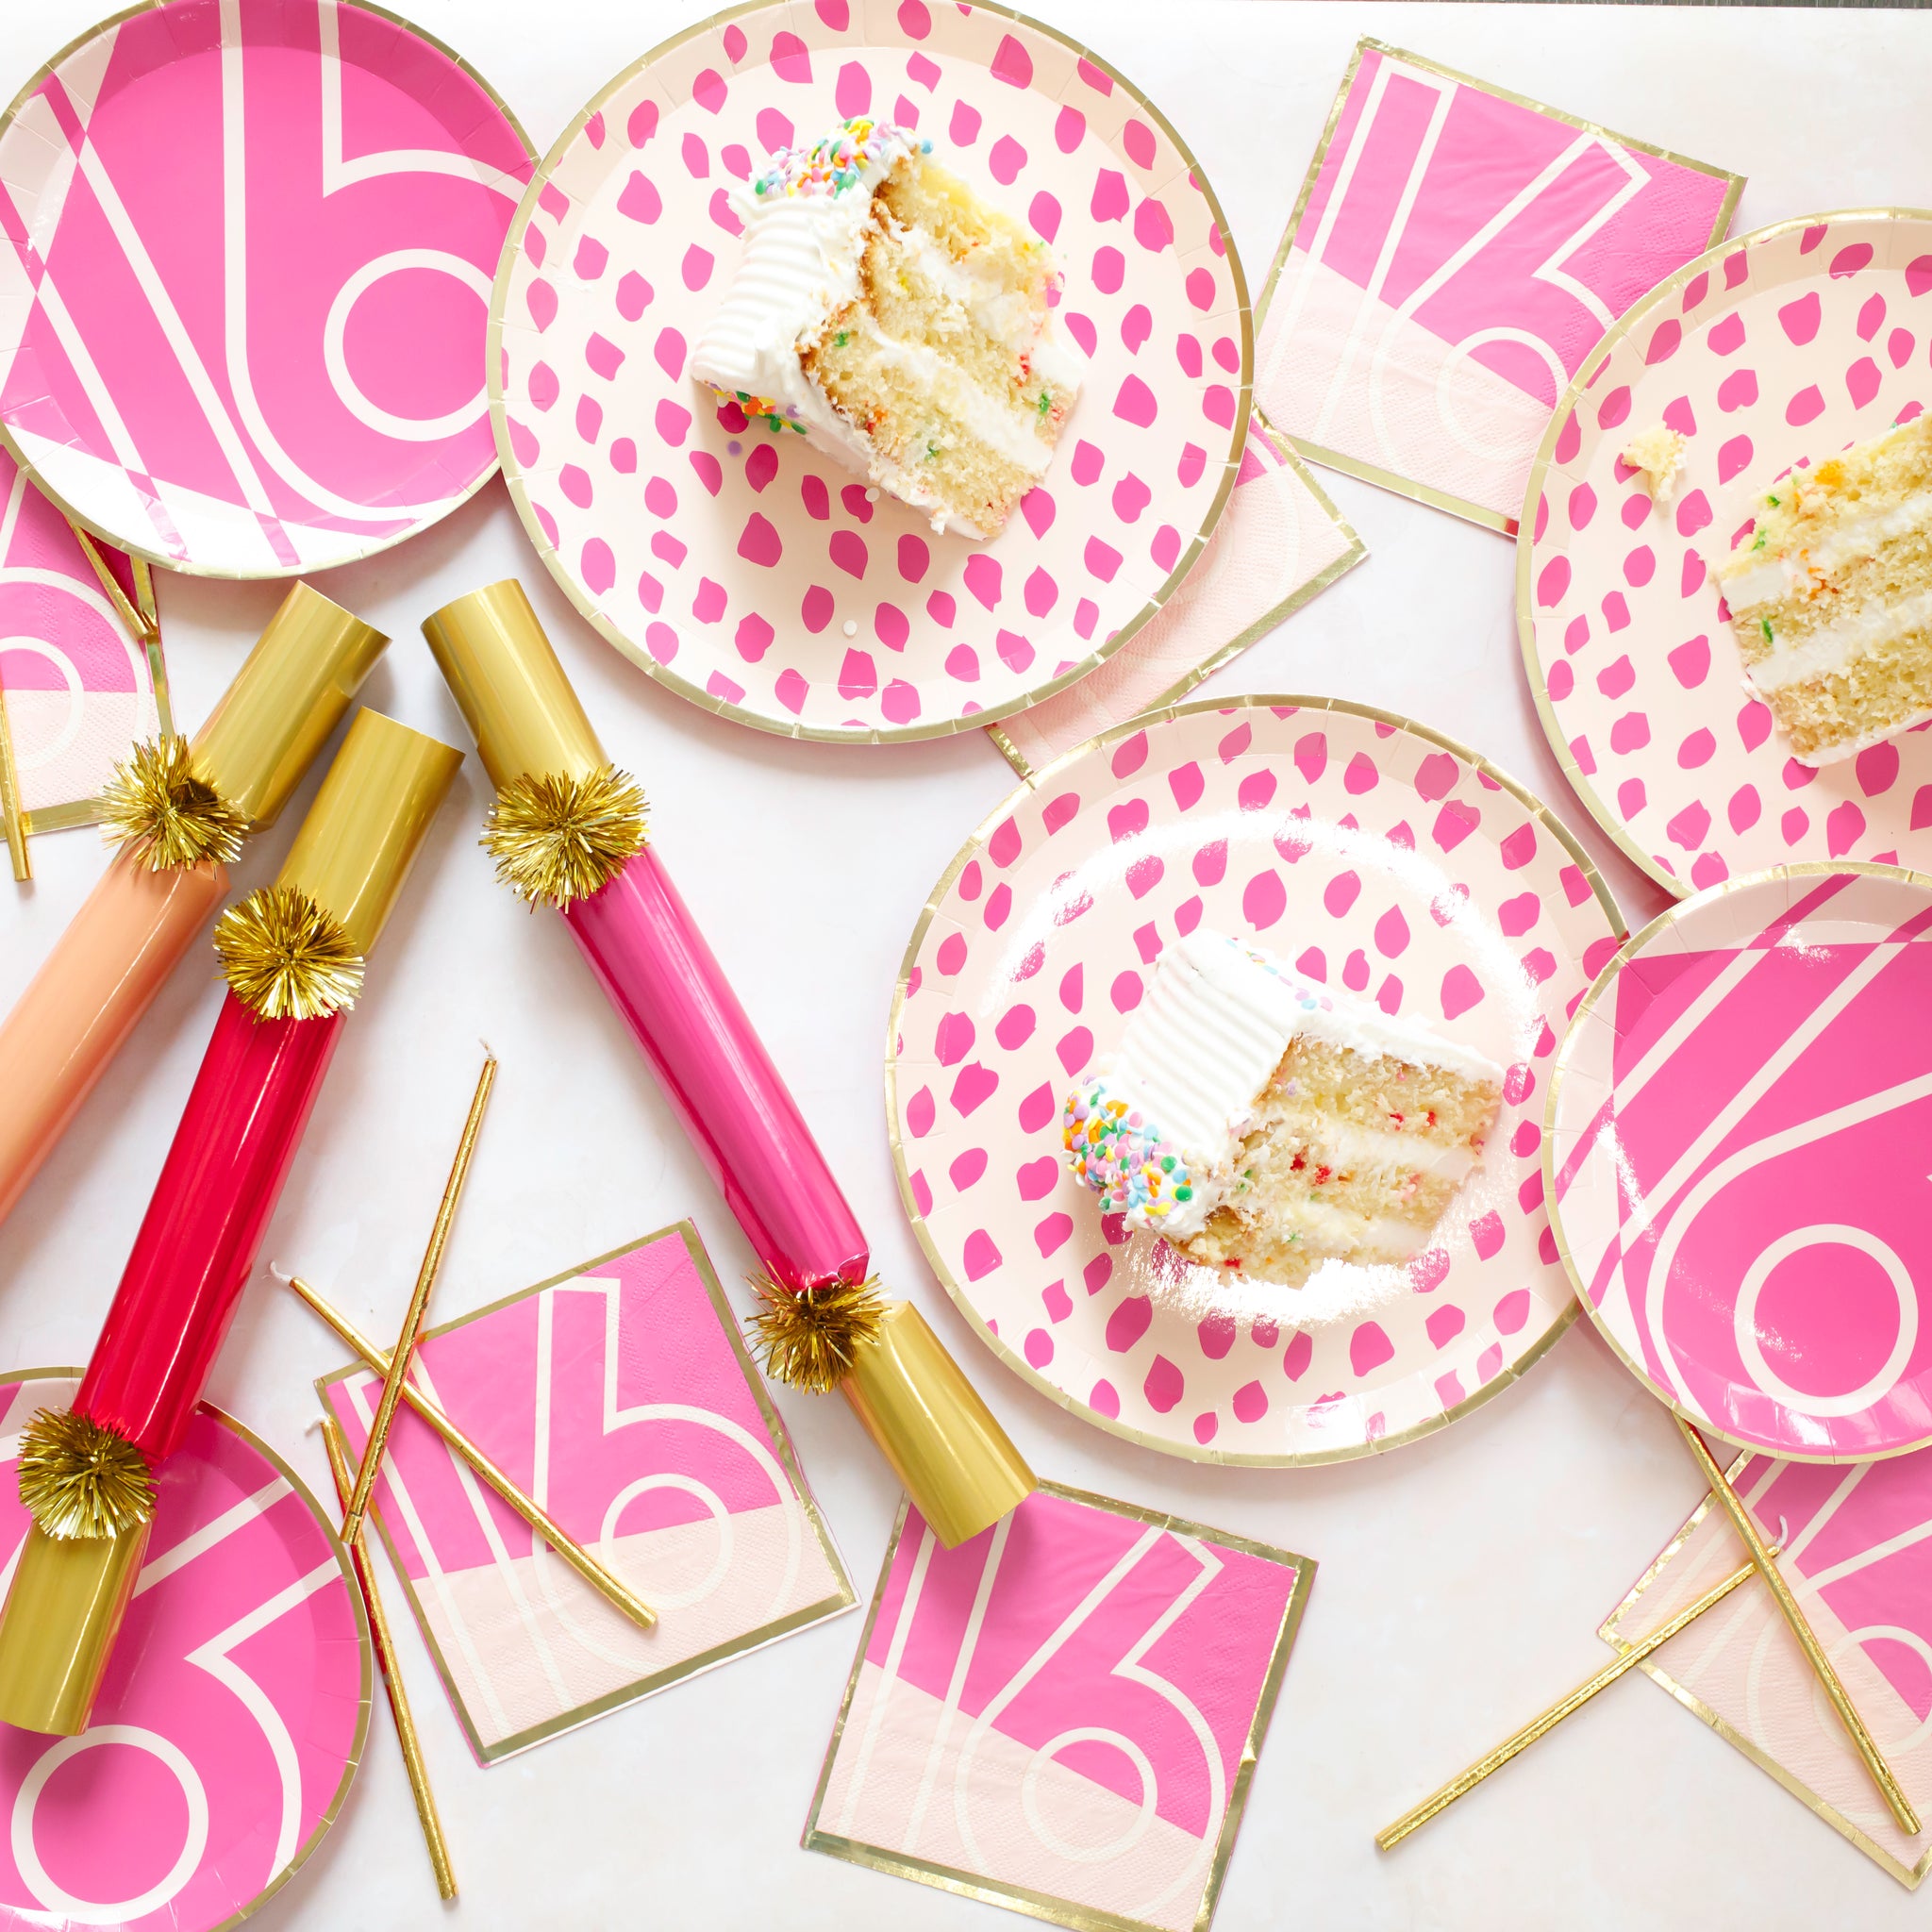 Birthday party supplies for a Sweet 16 celebration